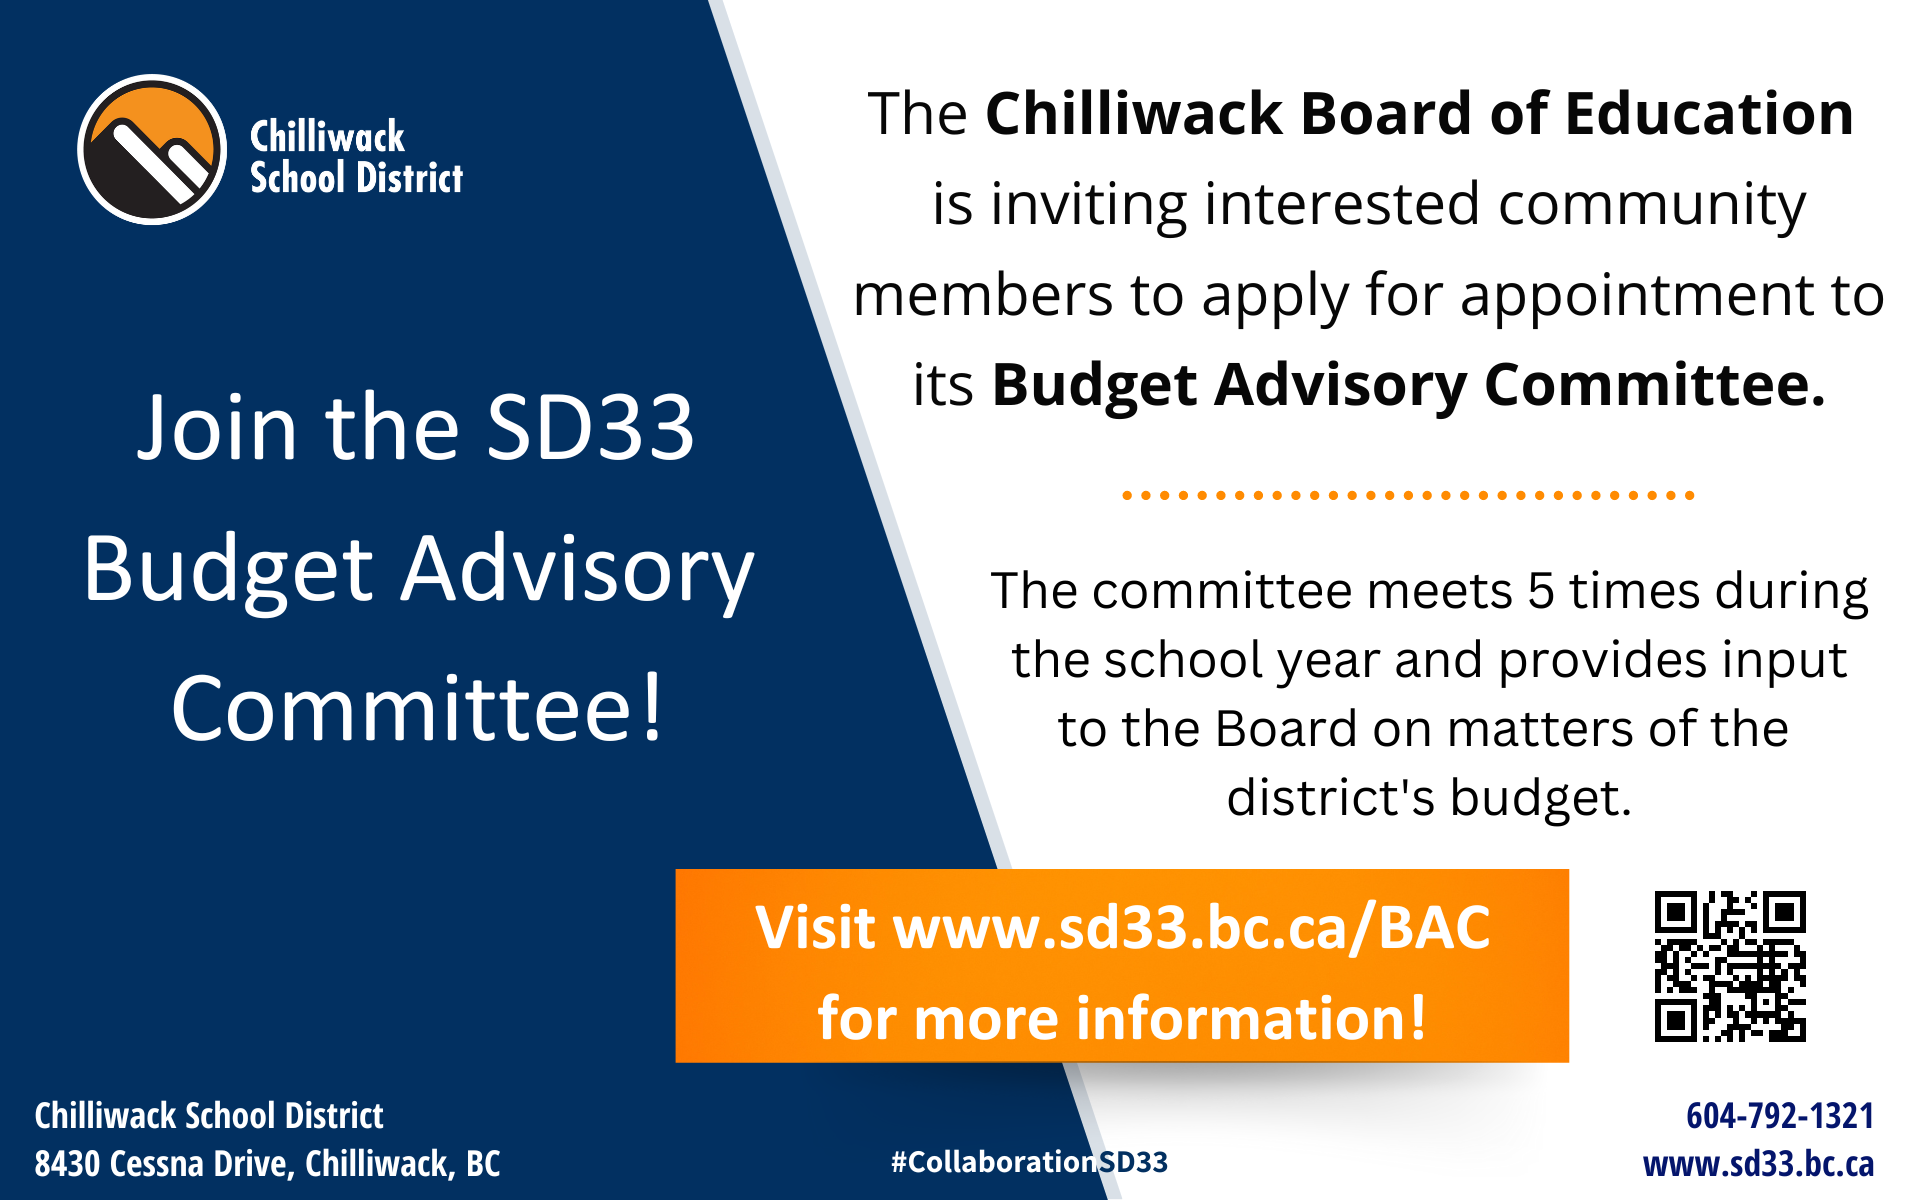 Image of an advertisement for the Budget Advisory Committee Committee Member Application